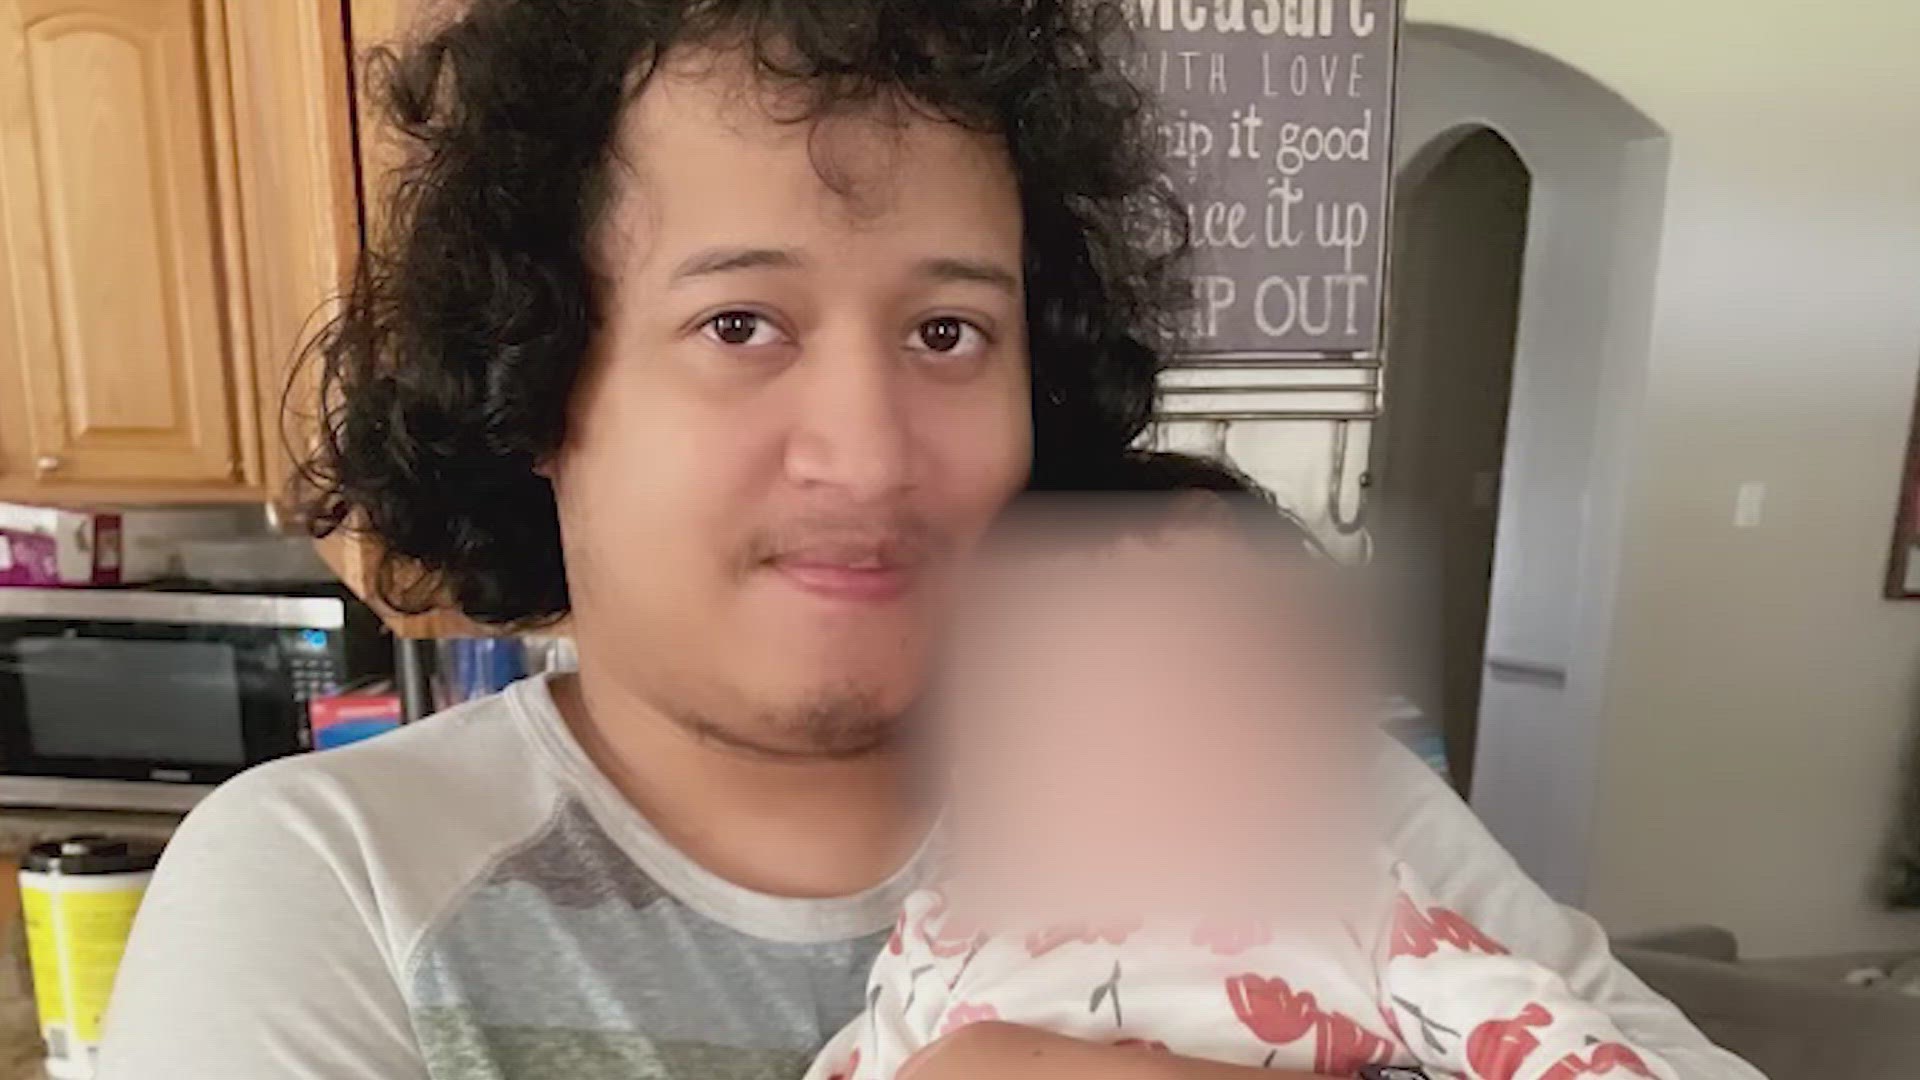 The good Samaritan who died trying to save a couple of kids was Miguel Calzada, 23, the Houston Police Department said Monday.